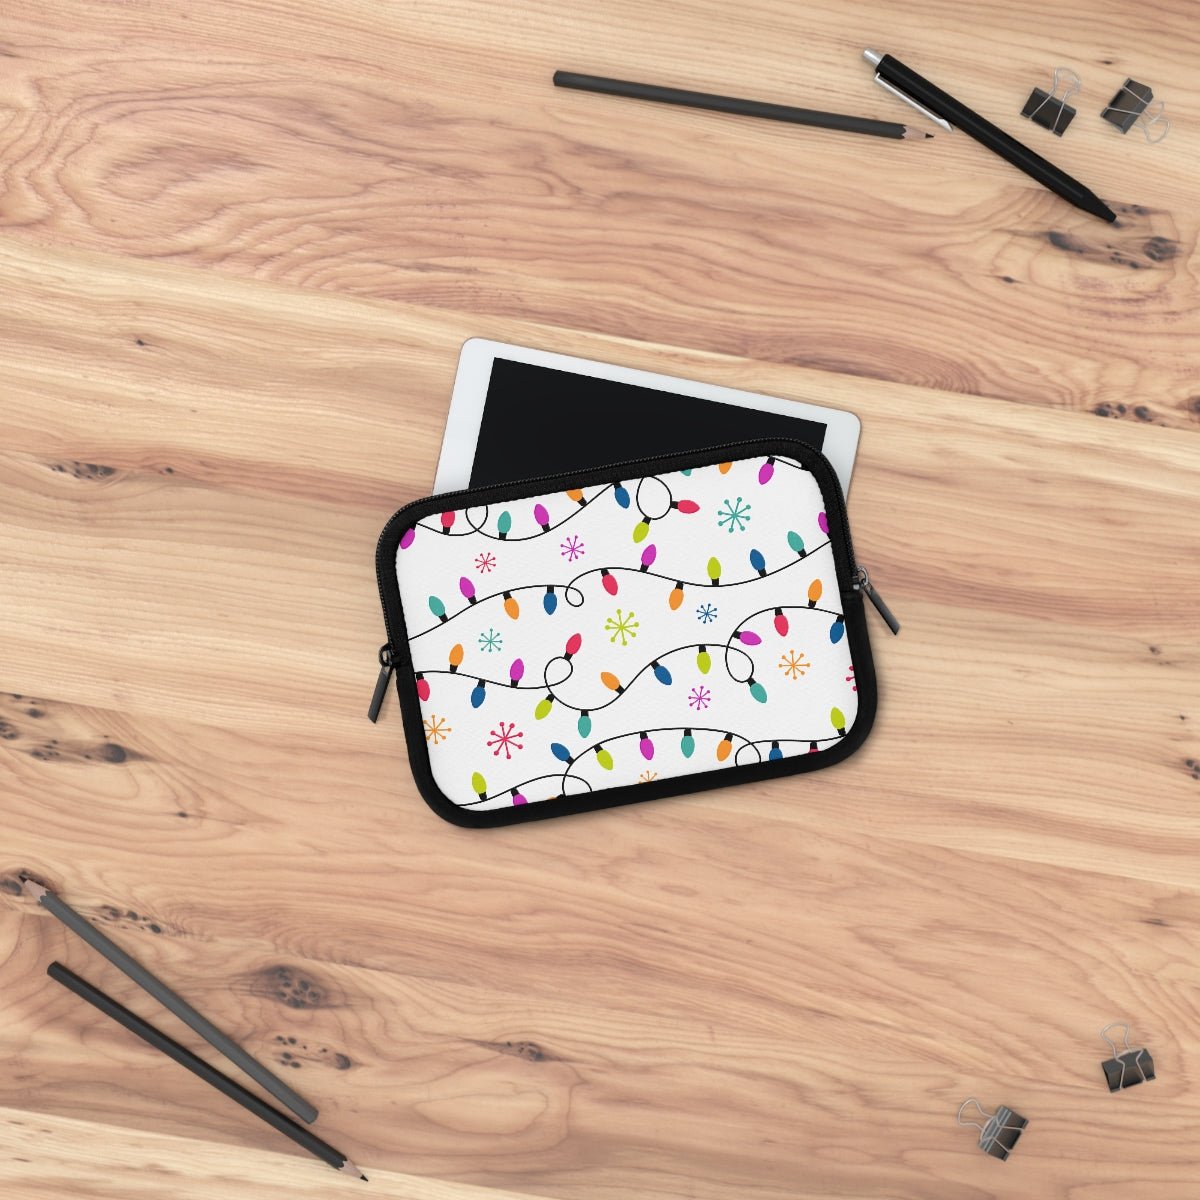 Christmas Lights Laptop Sleeve - Puffin Lime